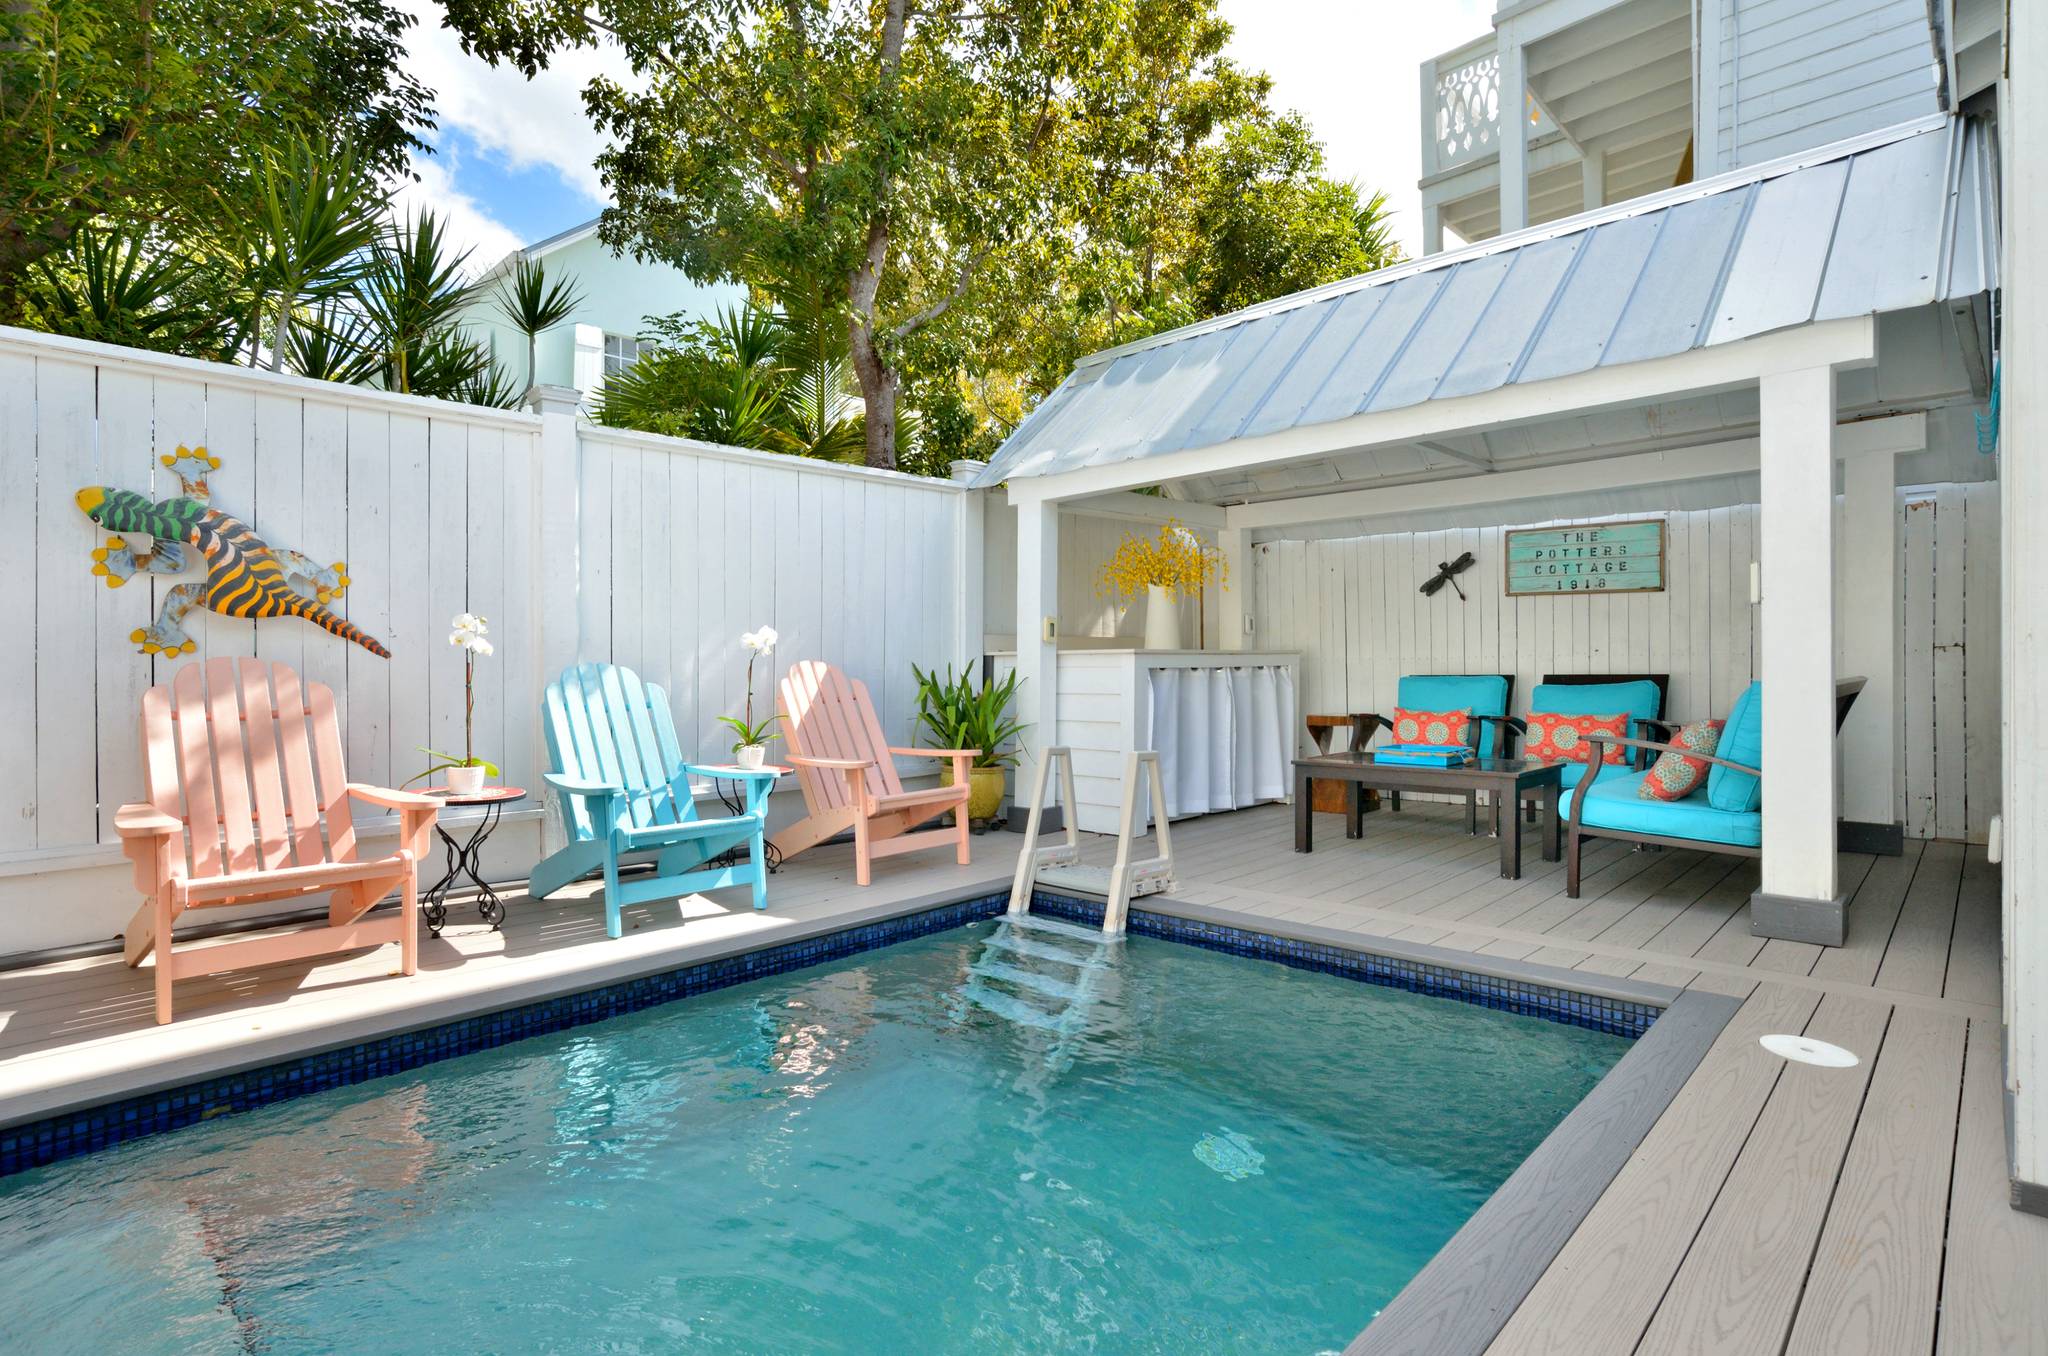 Potter's Cottage   Nightly Rental   Historic Key West Vacation Rentals